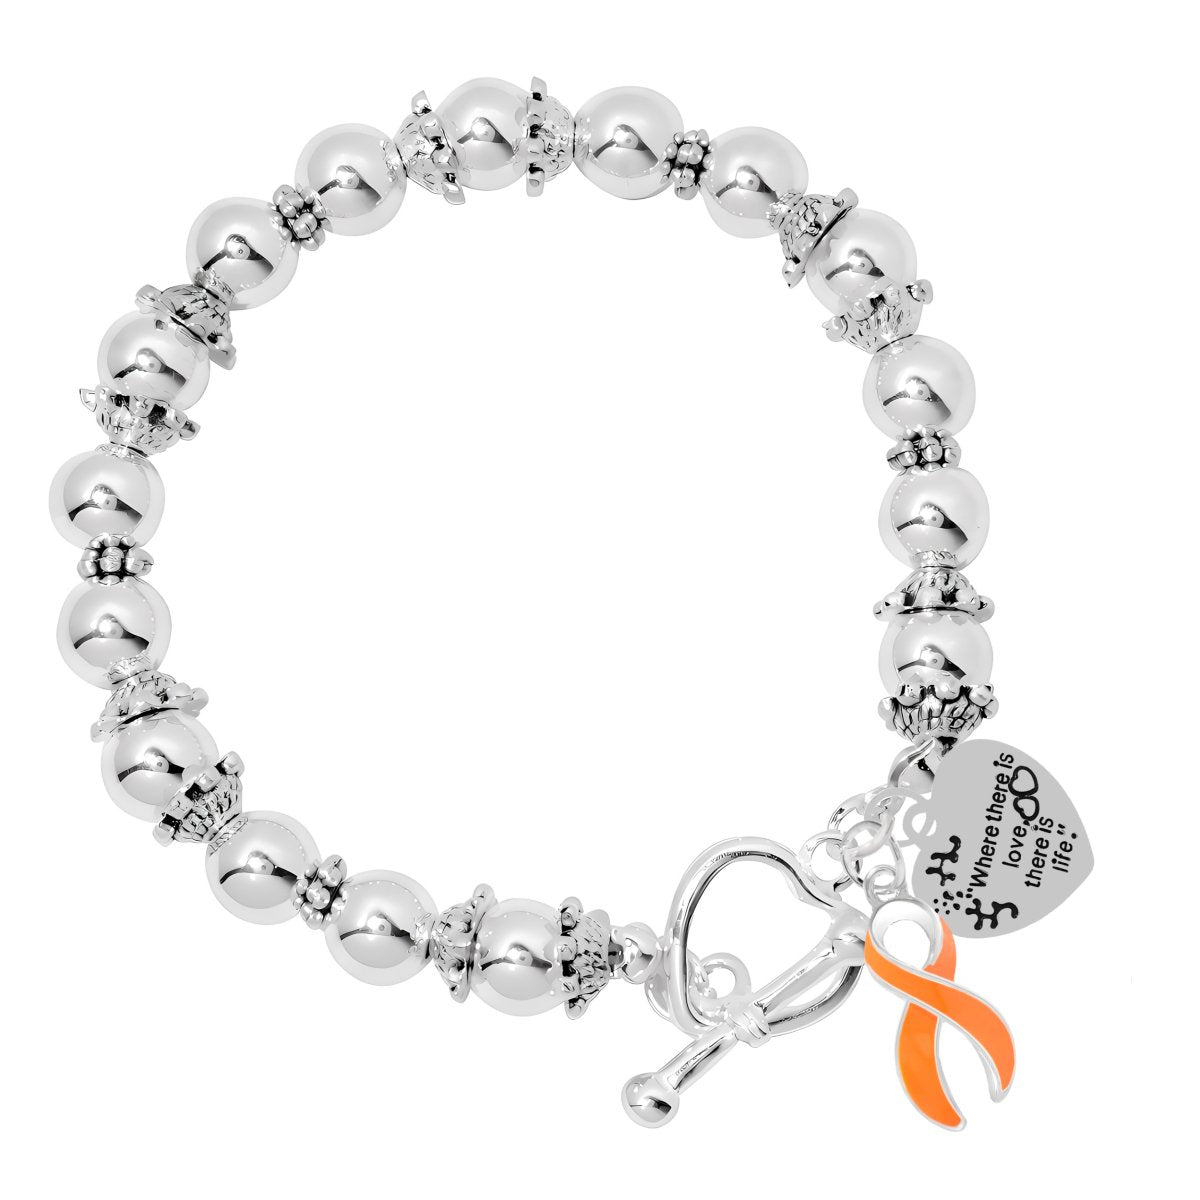 Where There is Love Leukemia Ribbon Bracelets - Fundraising For A Cause